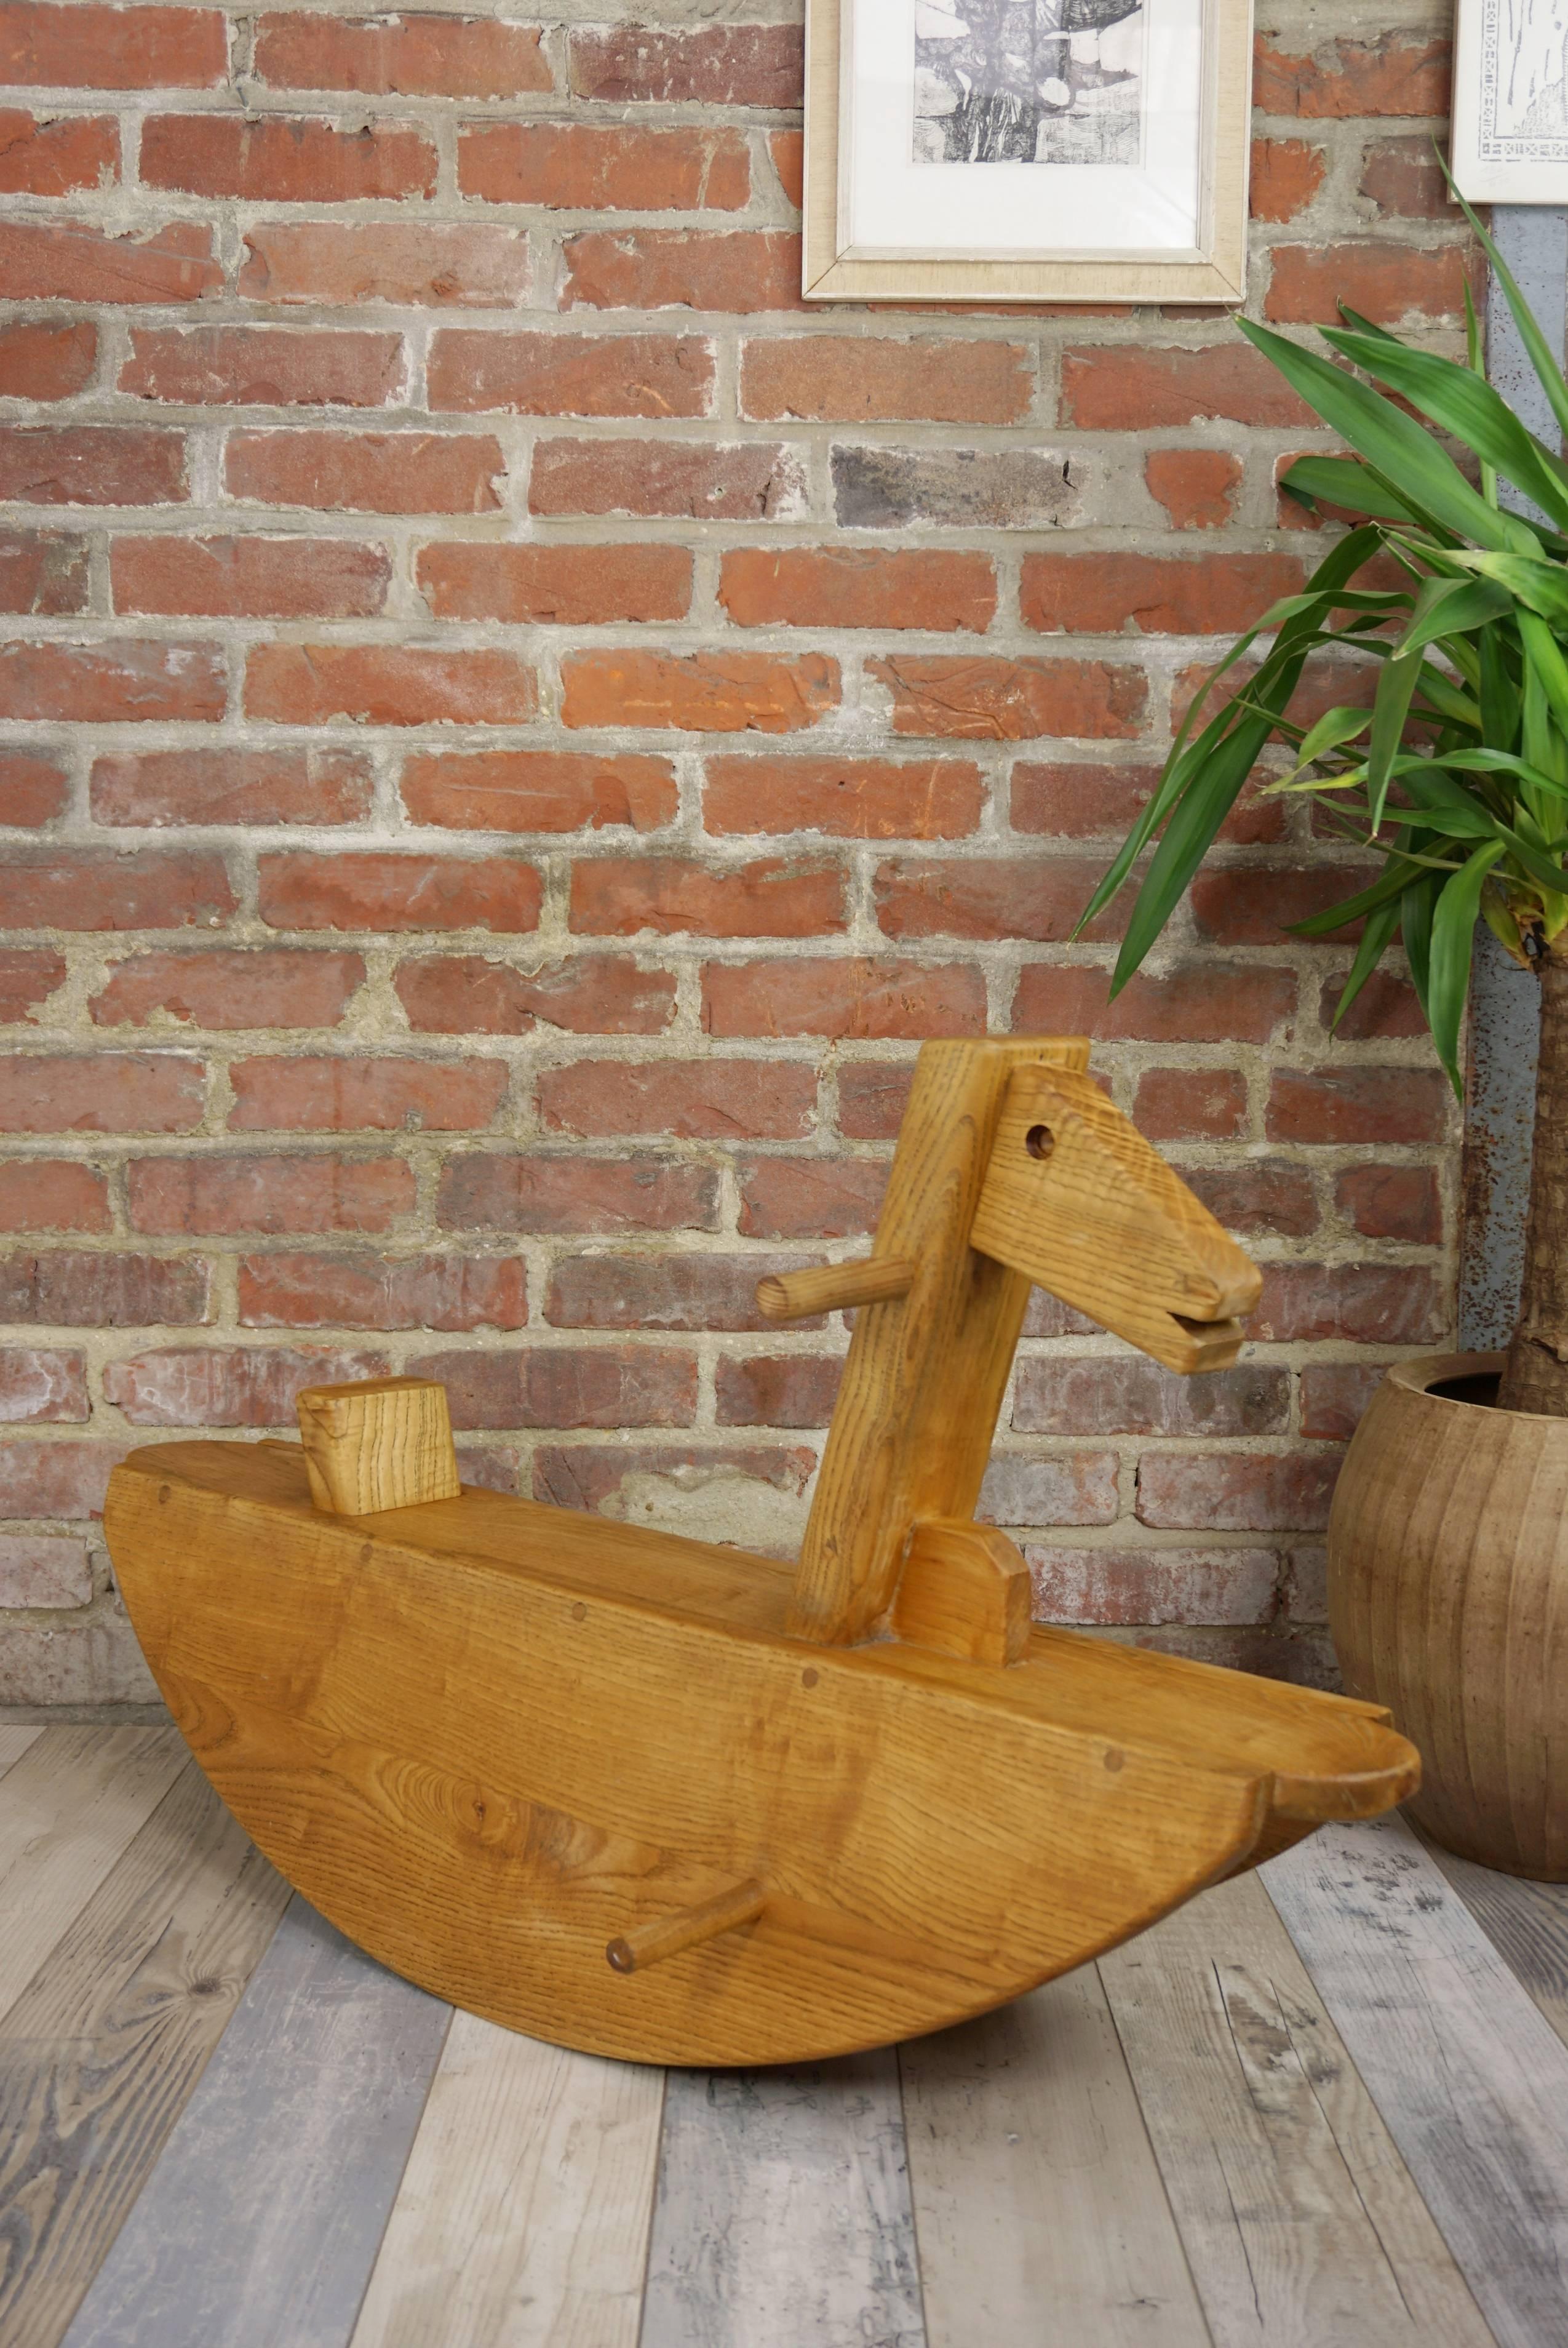 Adorable wooden old rocking horse made in France.